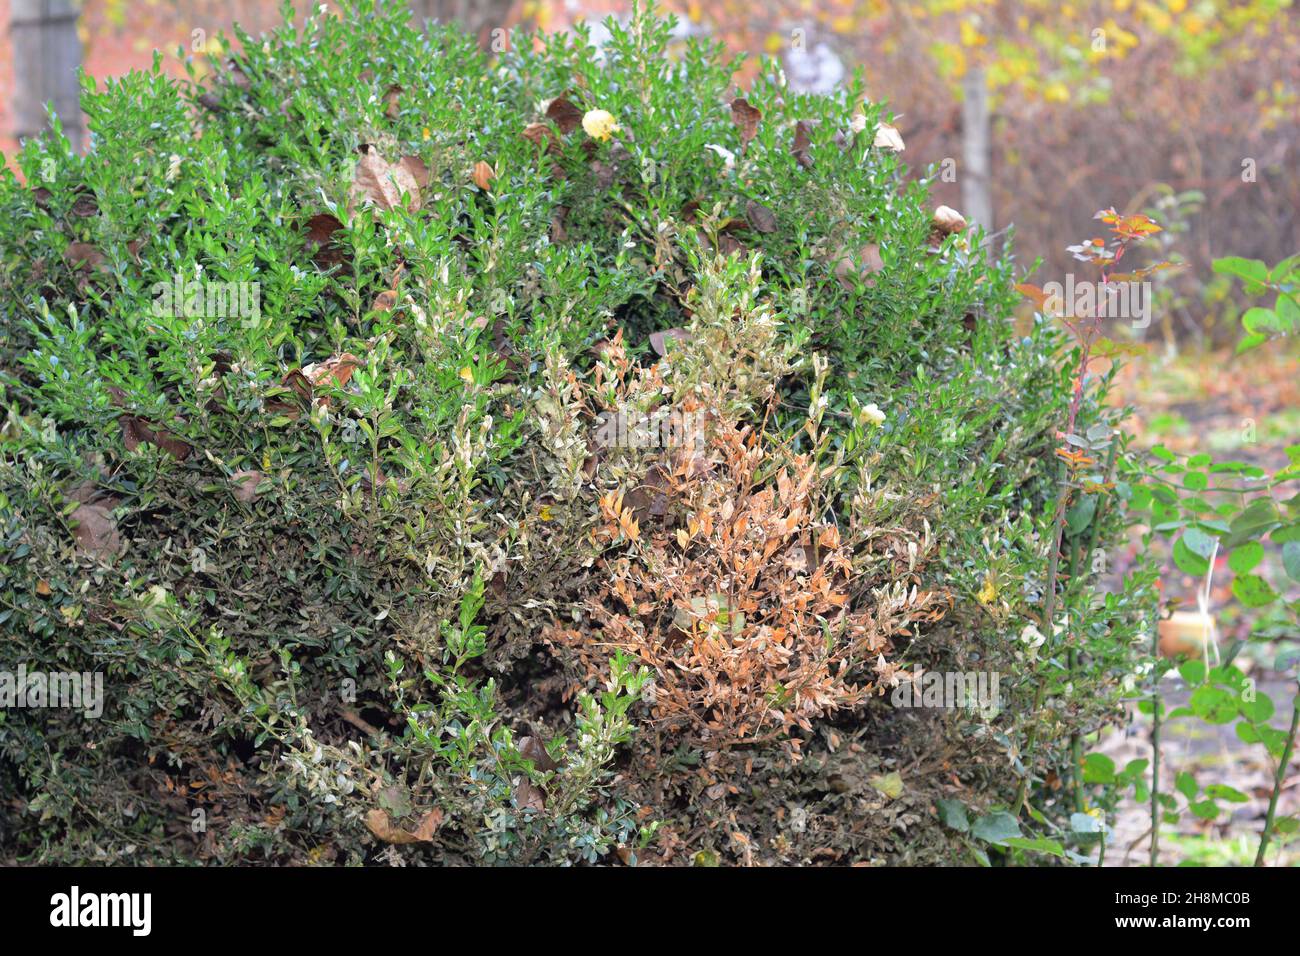 Boxwood, buxus blight disease, or boxwood leafminer spreading. A large ill boxwood bush with brown spots and patches. Stock Photo